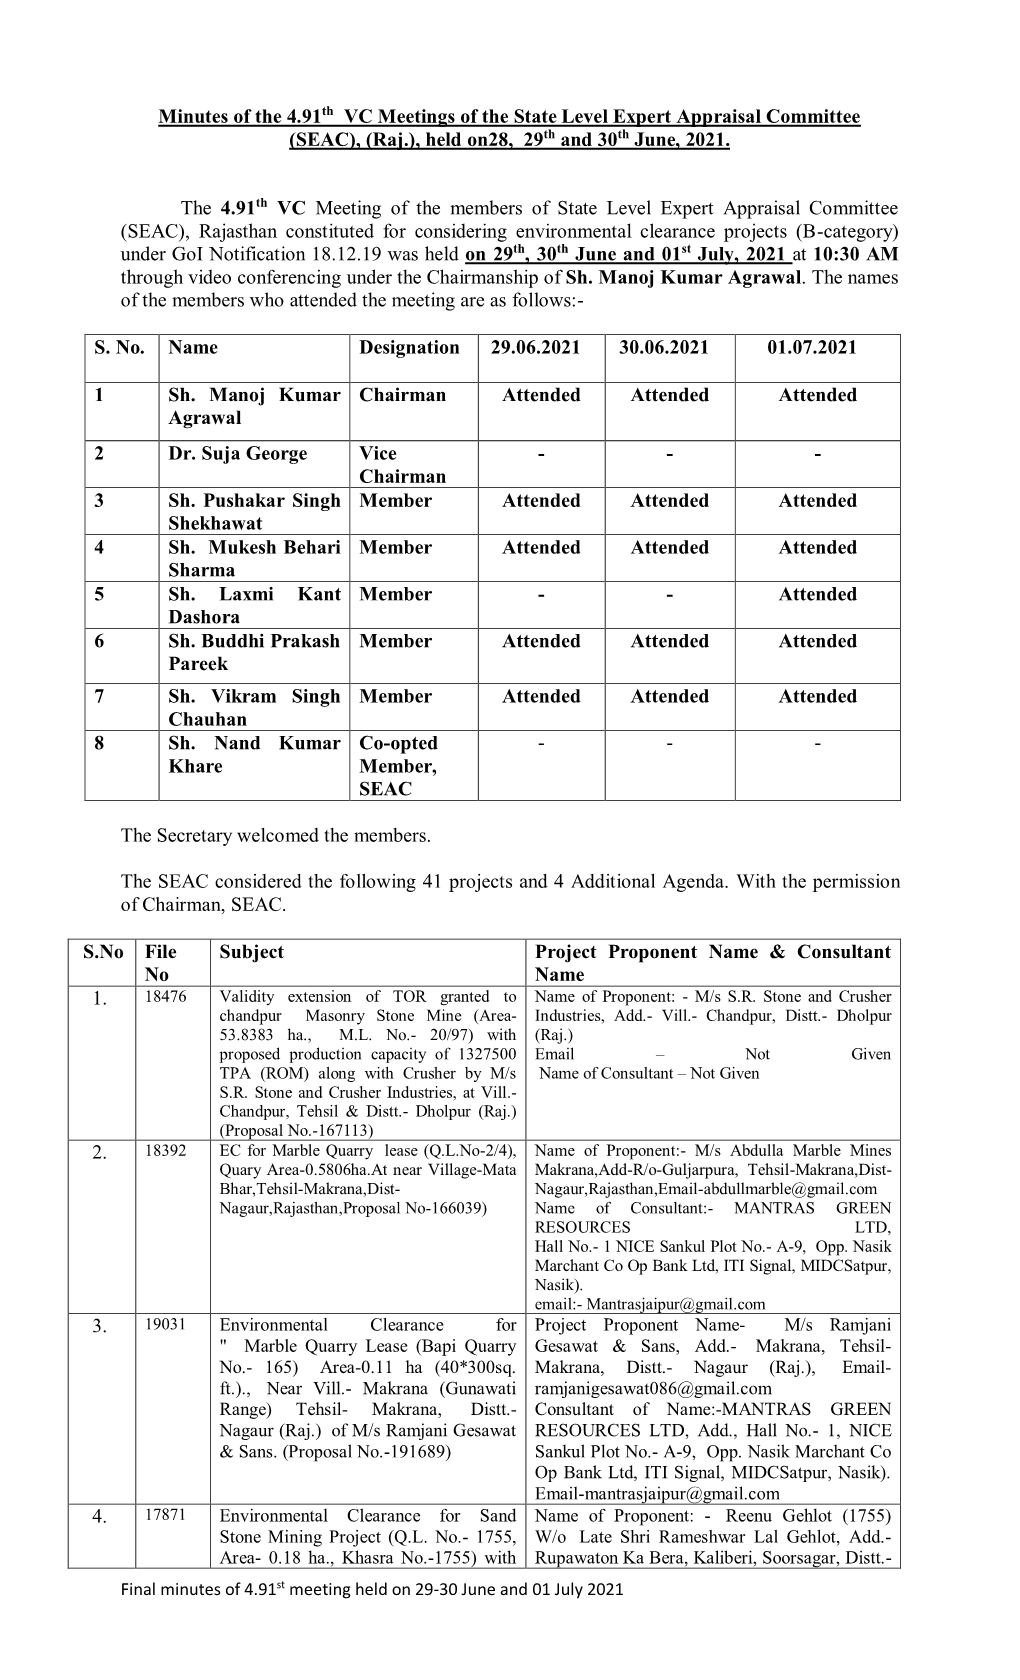 Minutes of the 4.91Th VC Meetings of the State Level Expert Appraisal Committee (SEAC), (Raj.), Held On28, 29Th and 30Th June, 2021